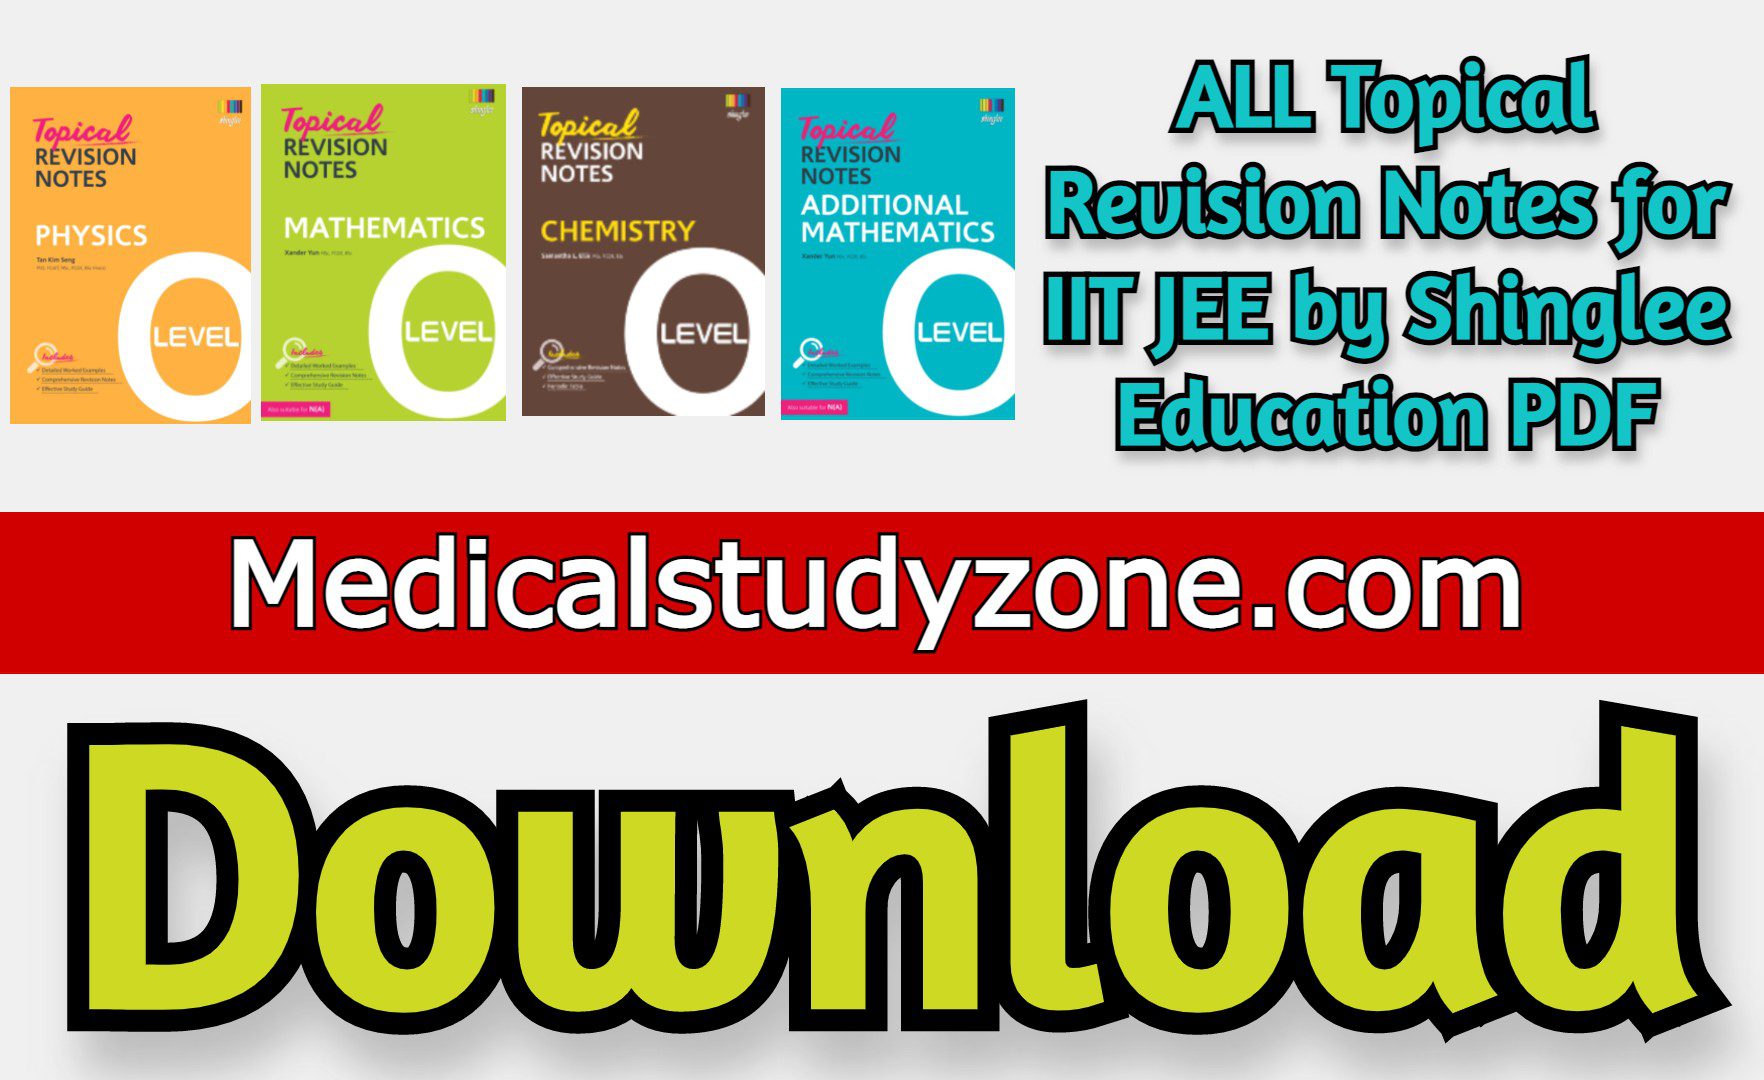 Download ALL Topical Revision Notes for IIT JEE by Shinglee Education PDF Free